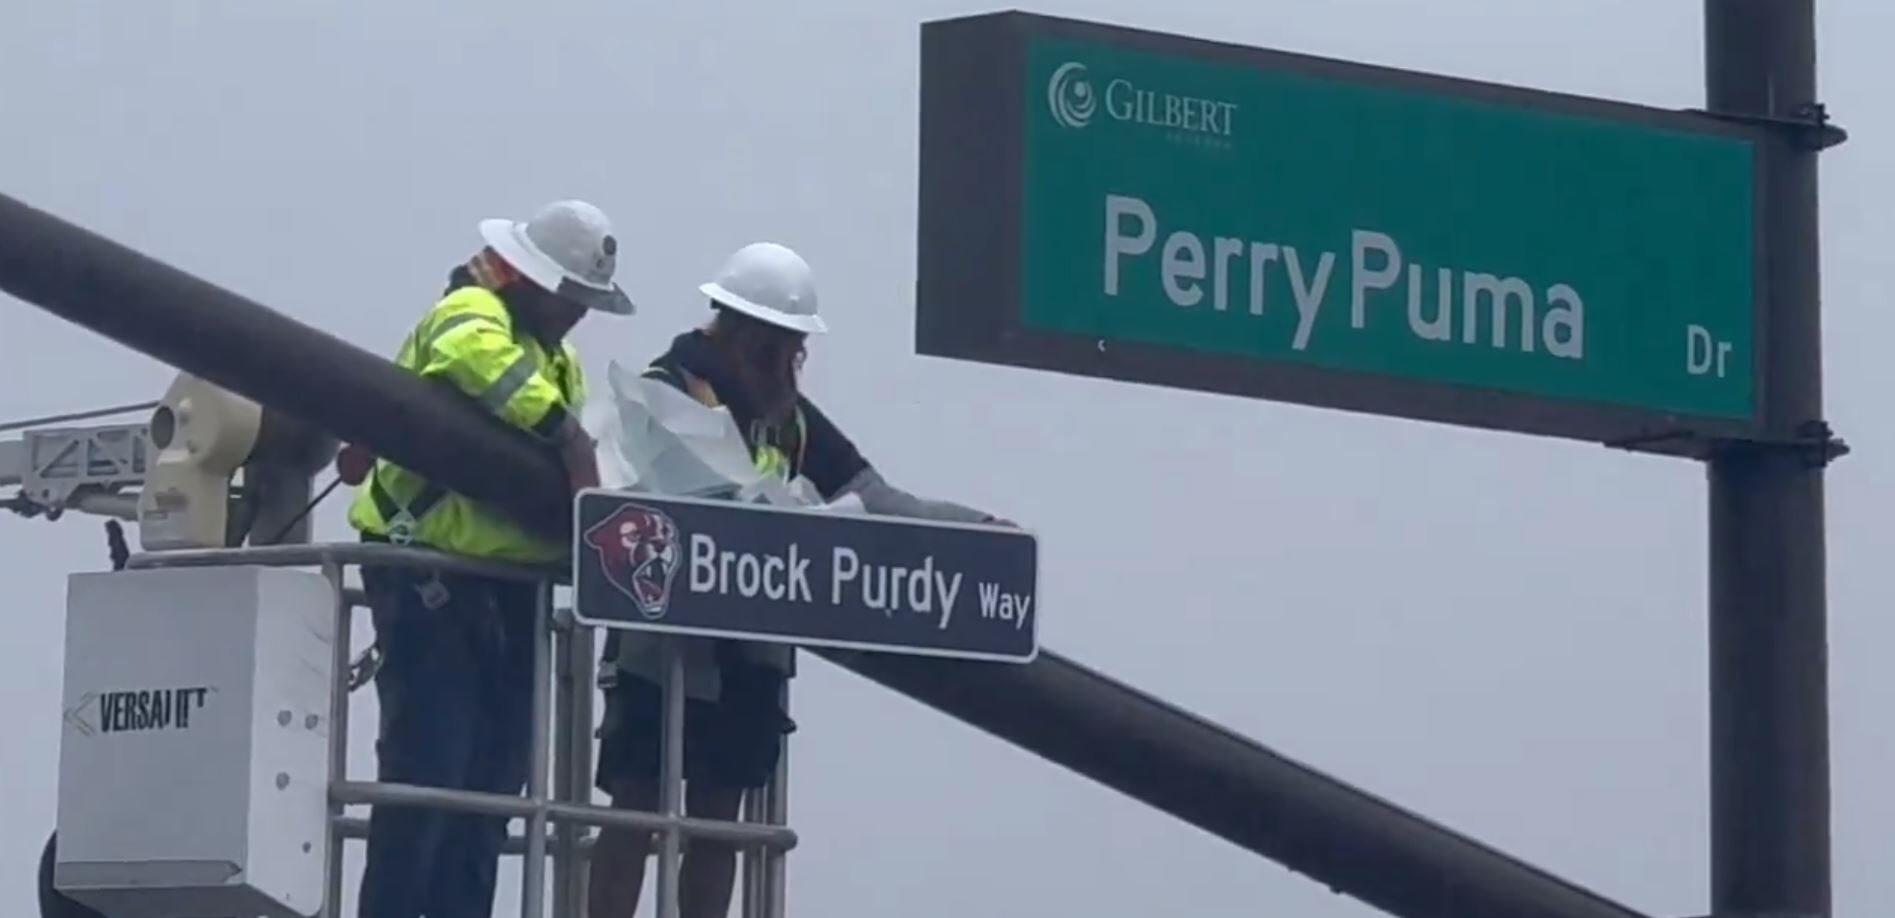 City officials unveil the Brock Purdy Way sign at the entrance of Perry High School. (Twitter photo...